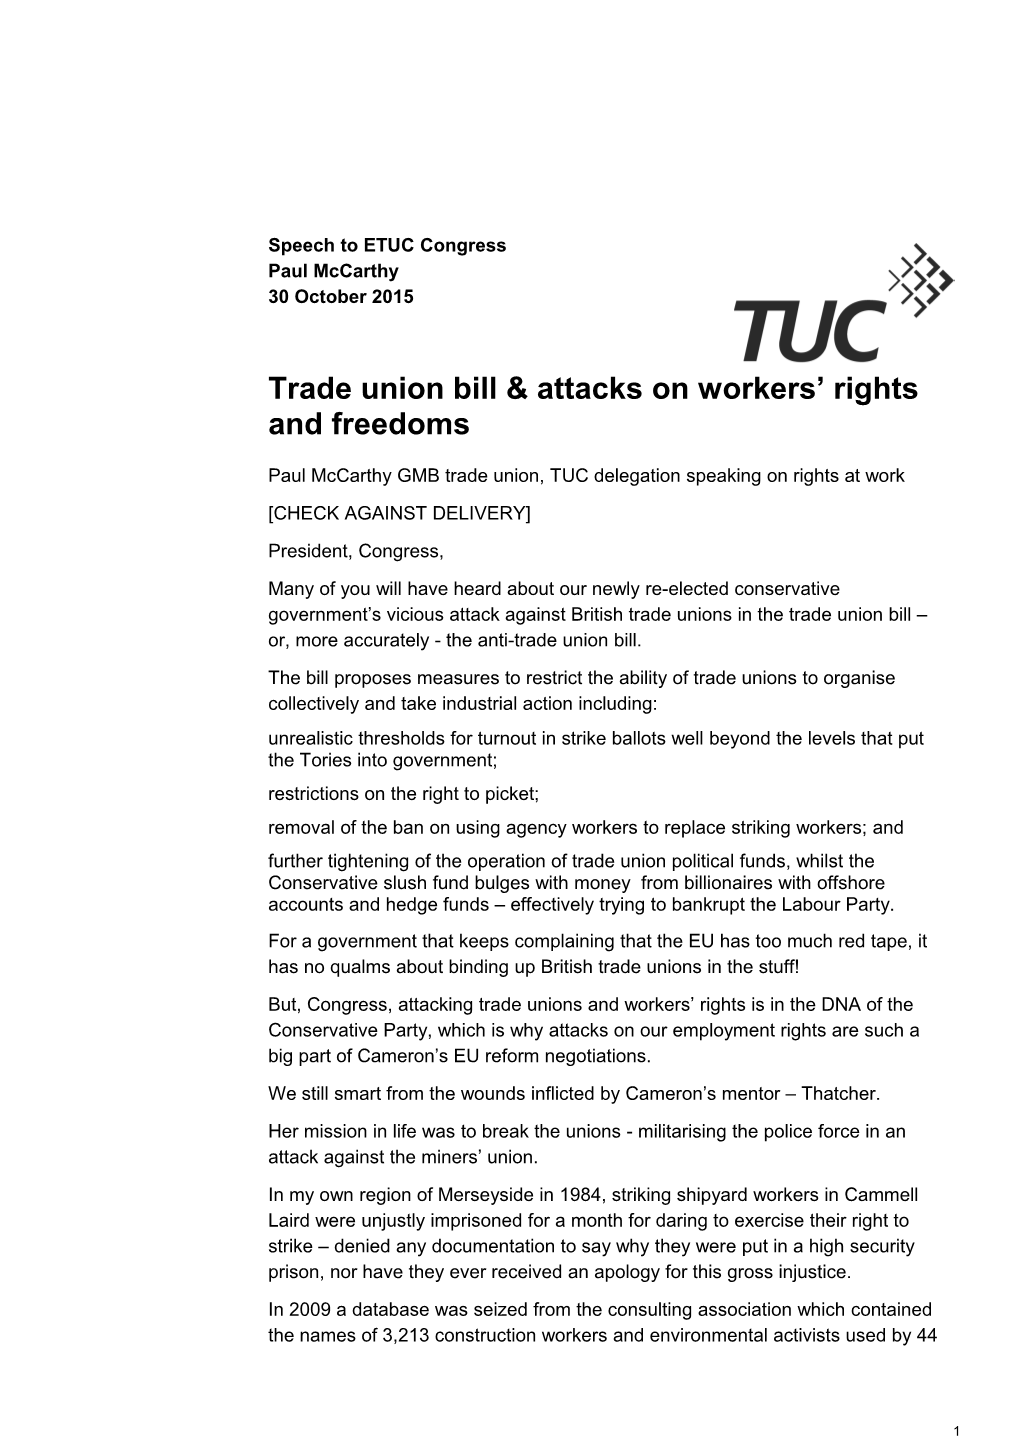 Paul Mccarthy GMB Trade Union, TUC Delegation Speaking on Rights at Work